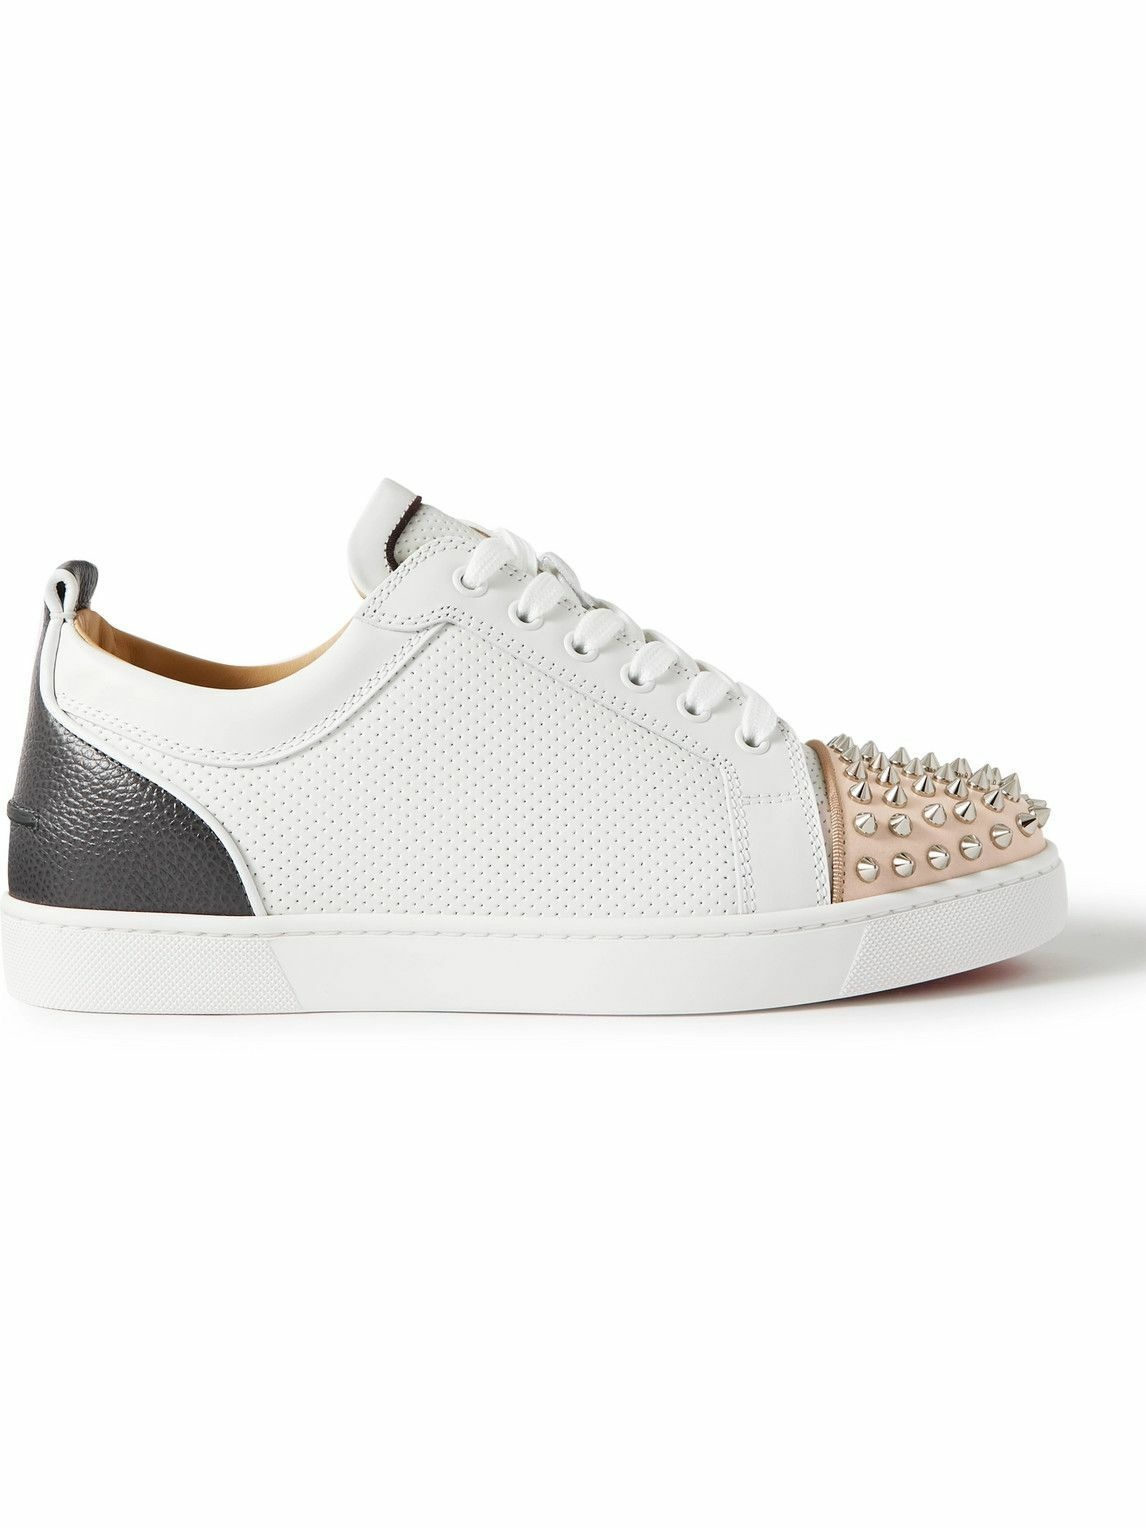 CHRISTIAN LOUBOUTIN: Louis Junior Spikes sneakers in leather